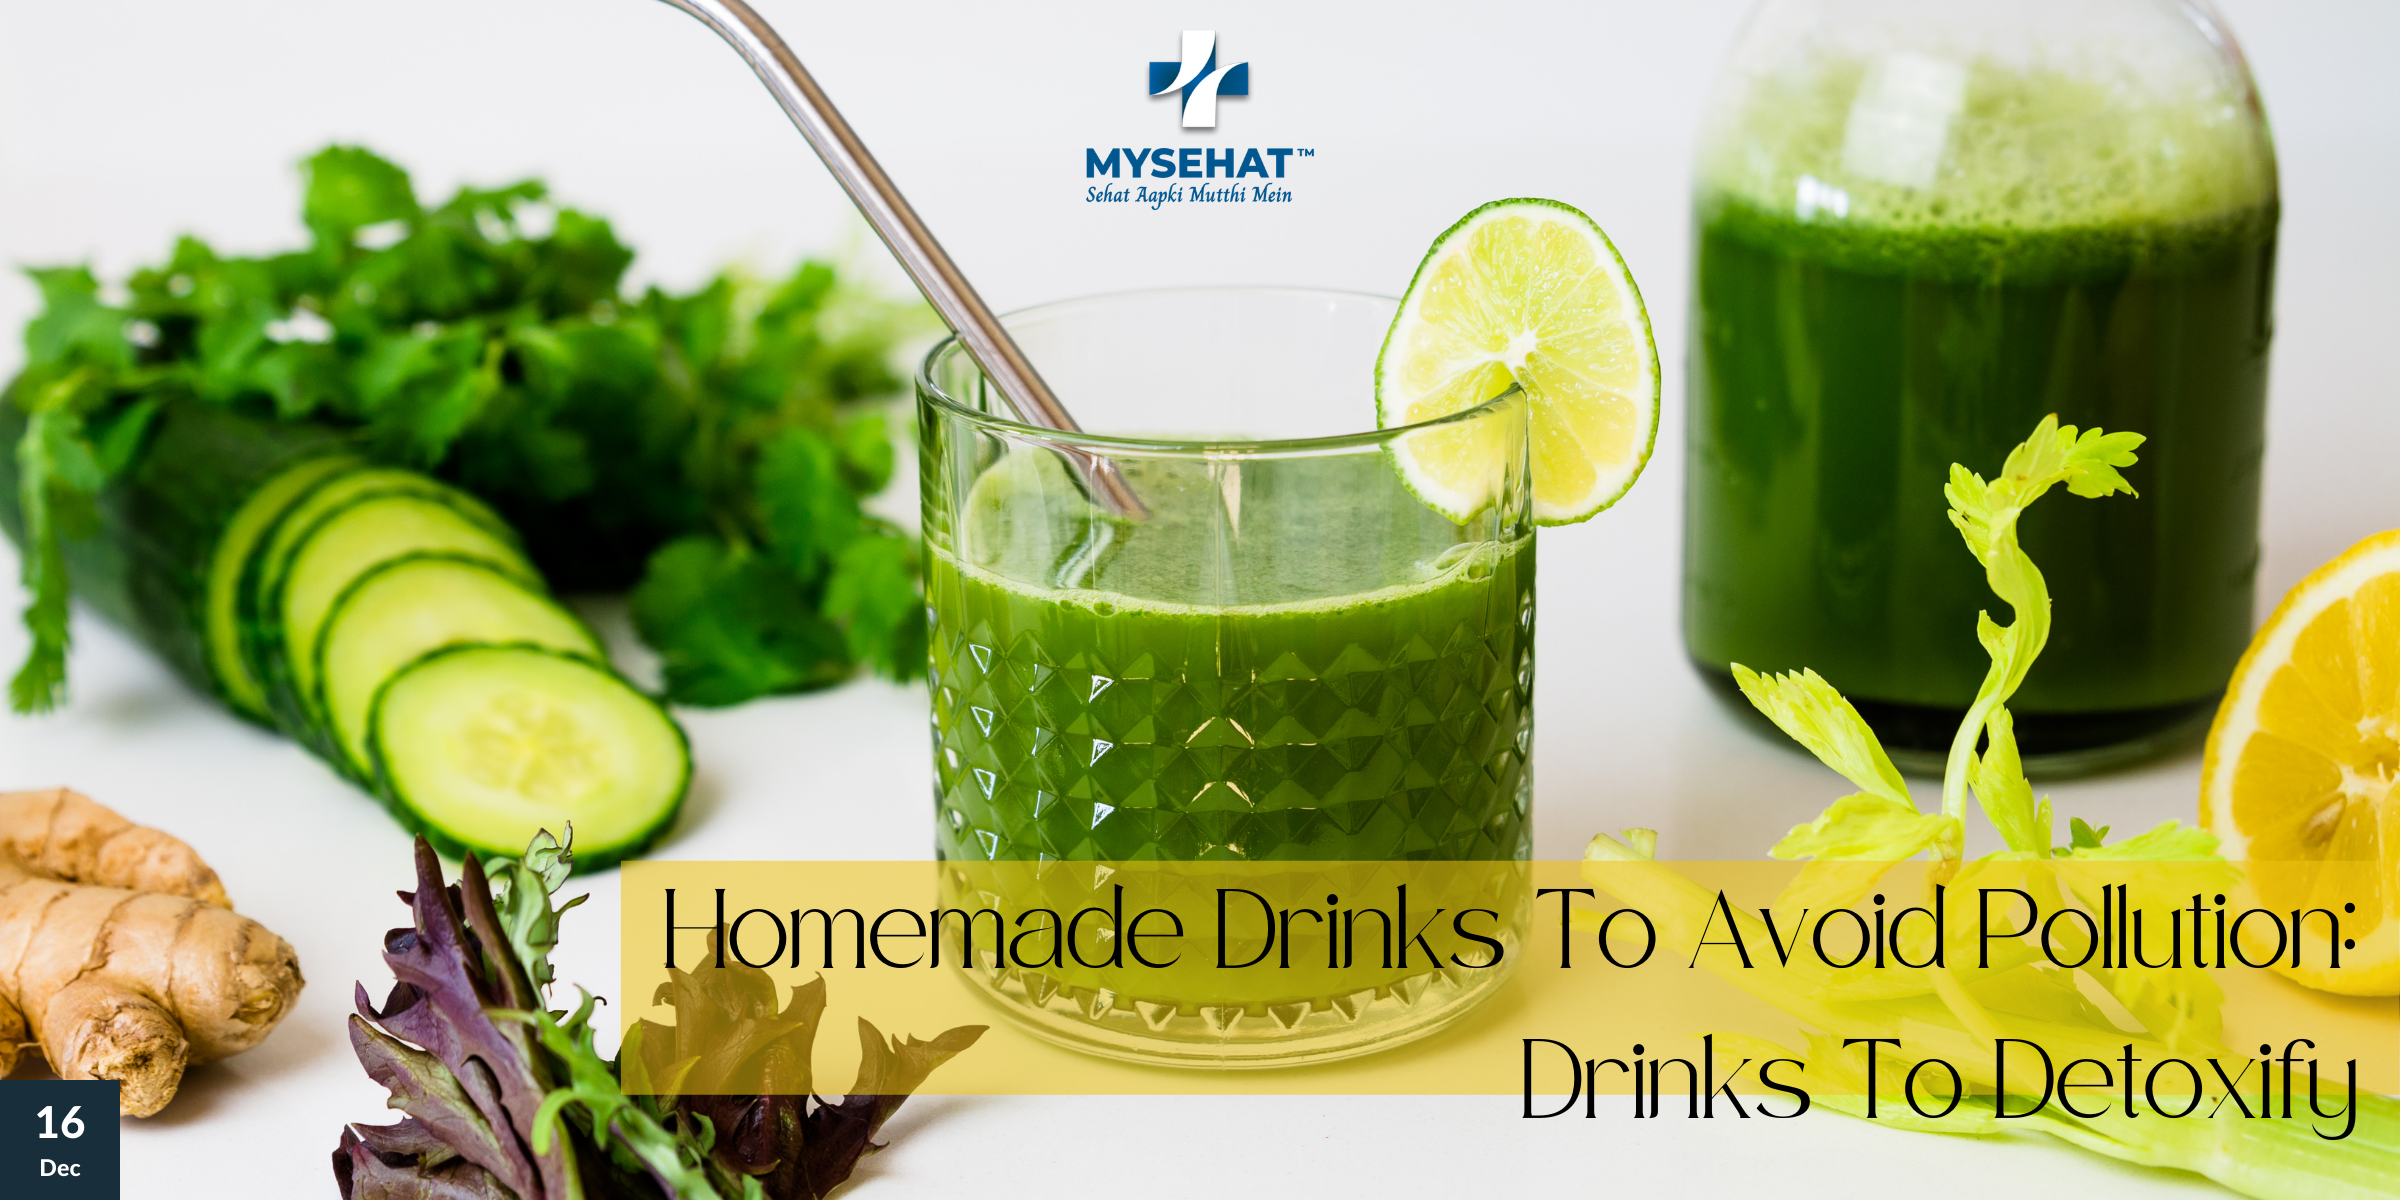 Homemade Drinks To Avoid Pollution: Drinks To Detoxify